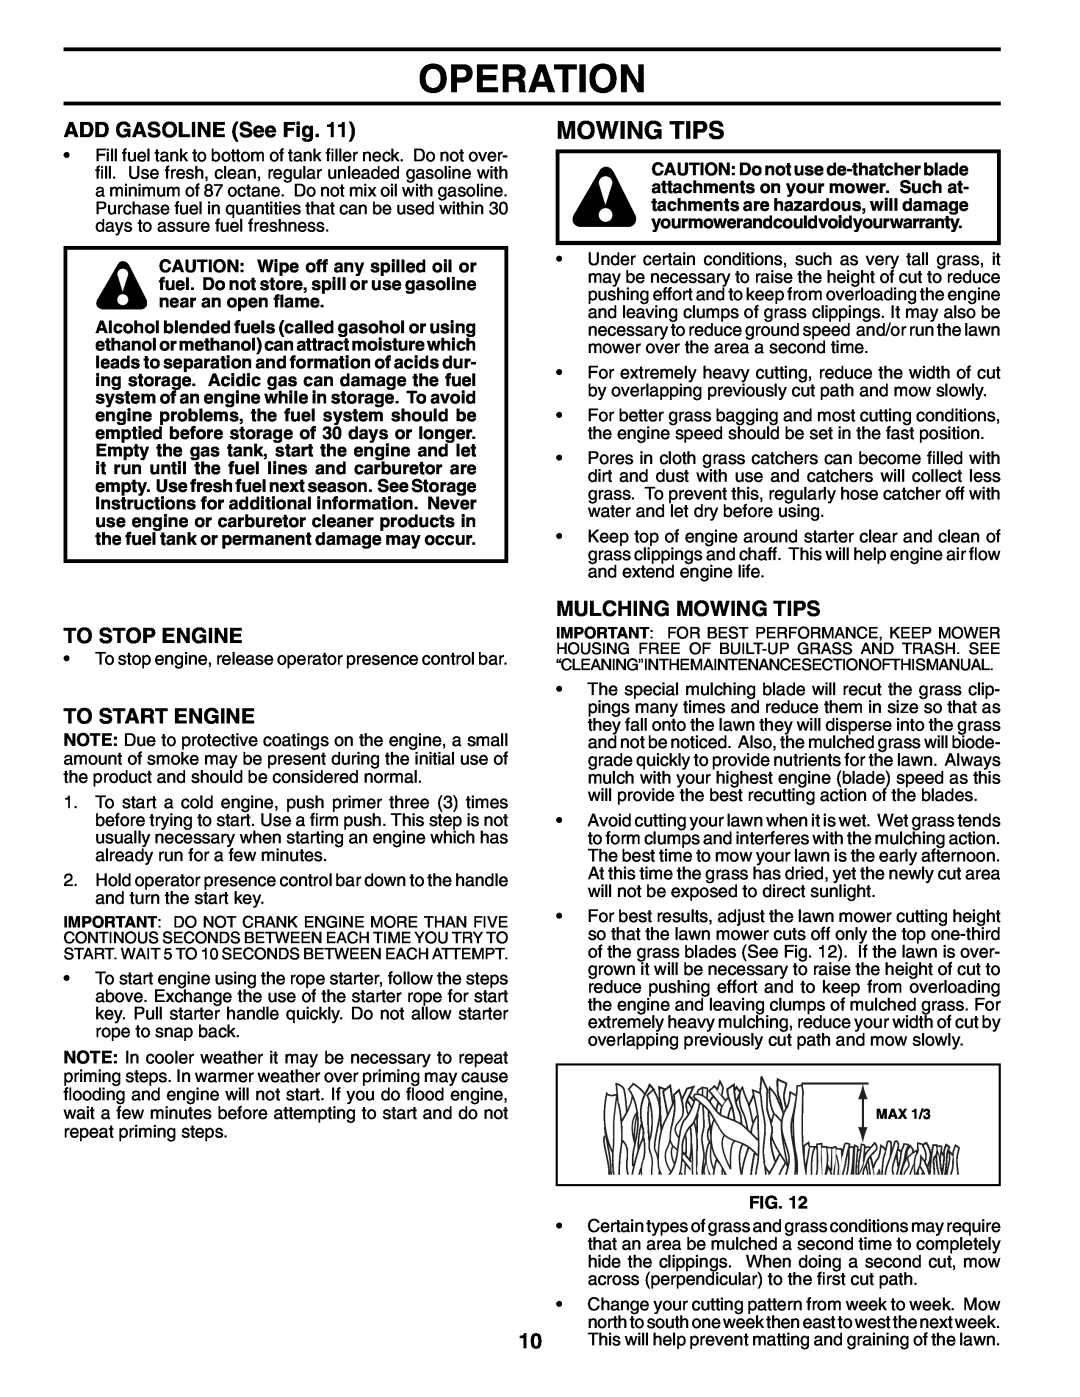 Husqvarna 7021RES owner manual ADD GASOLINE See Fig, To Stop Engine, To Start Engine, Mulching Mowing Tips, Operation 